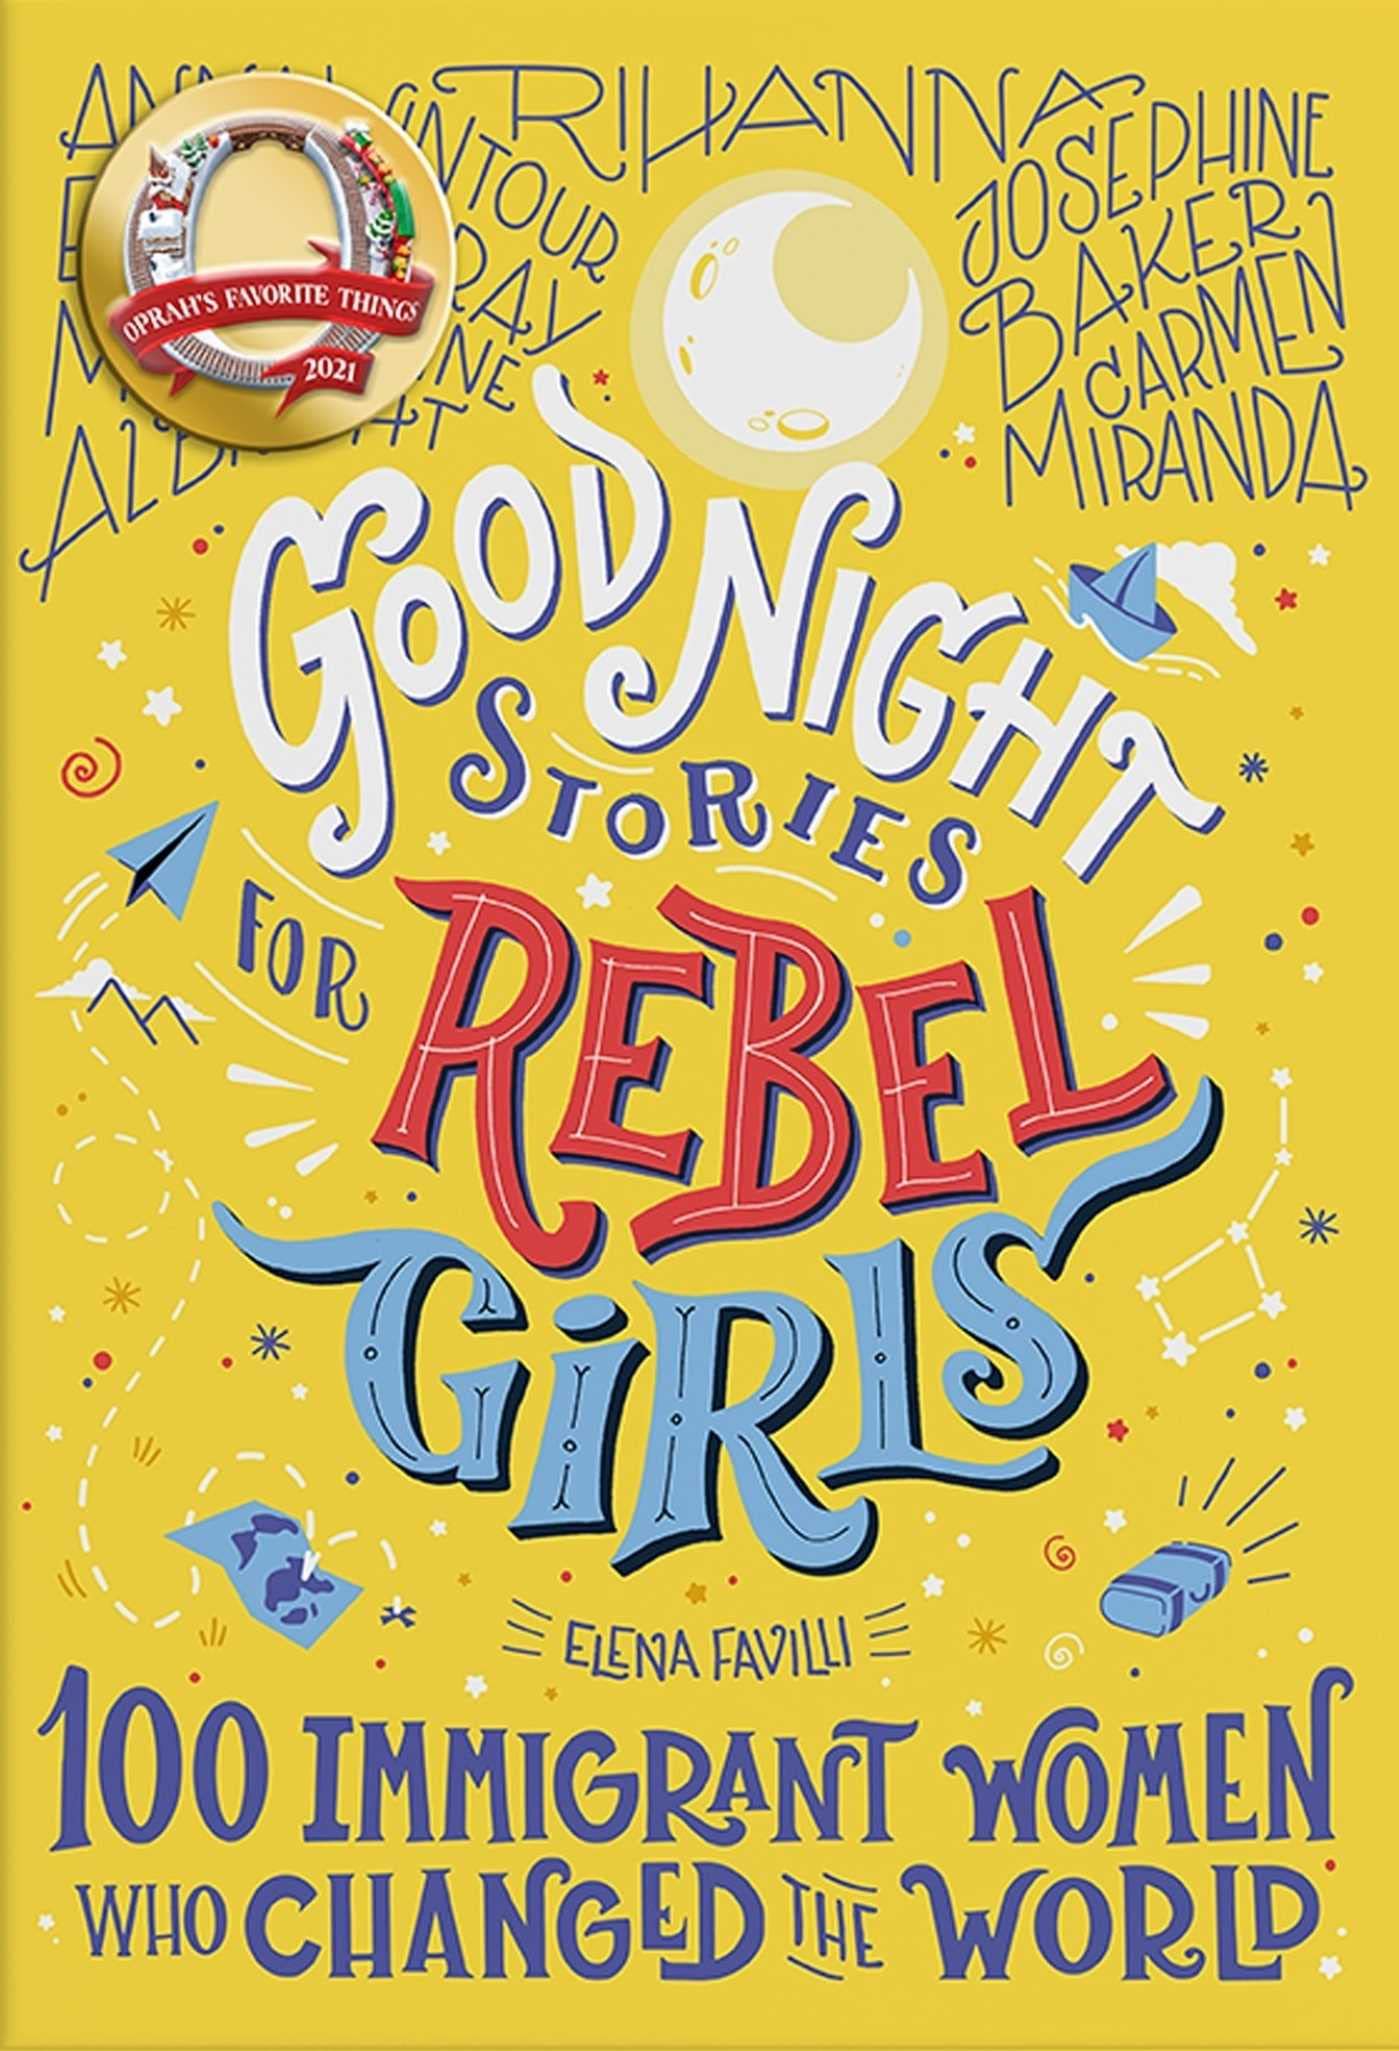 Good Night Stories for Rebel Girls // 100 Immigrant Women Who Changed the World, 3